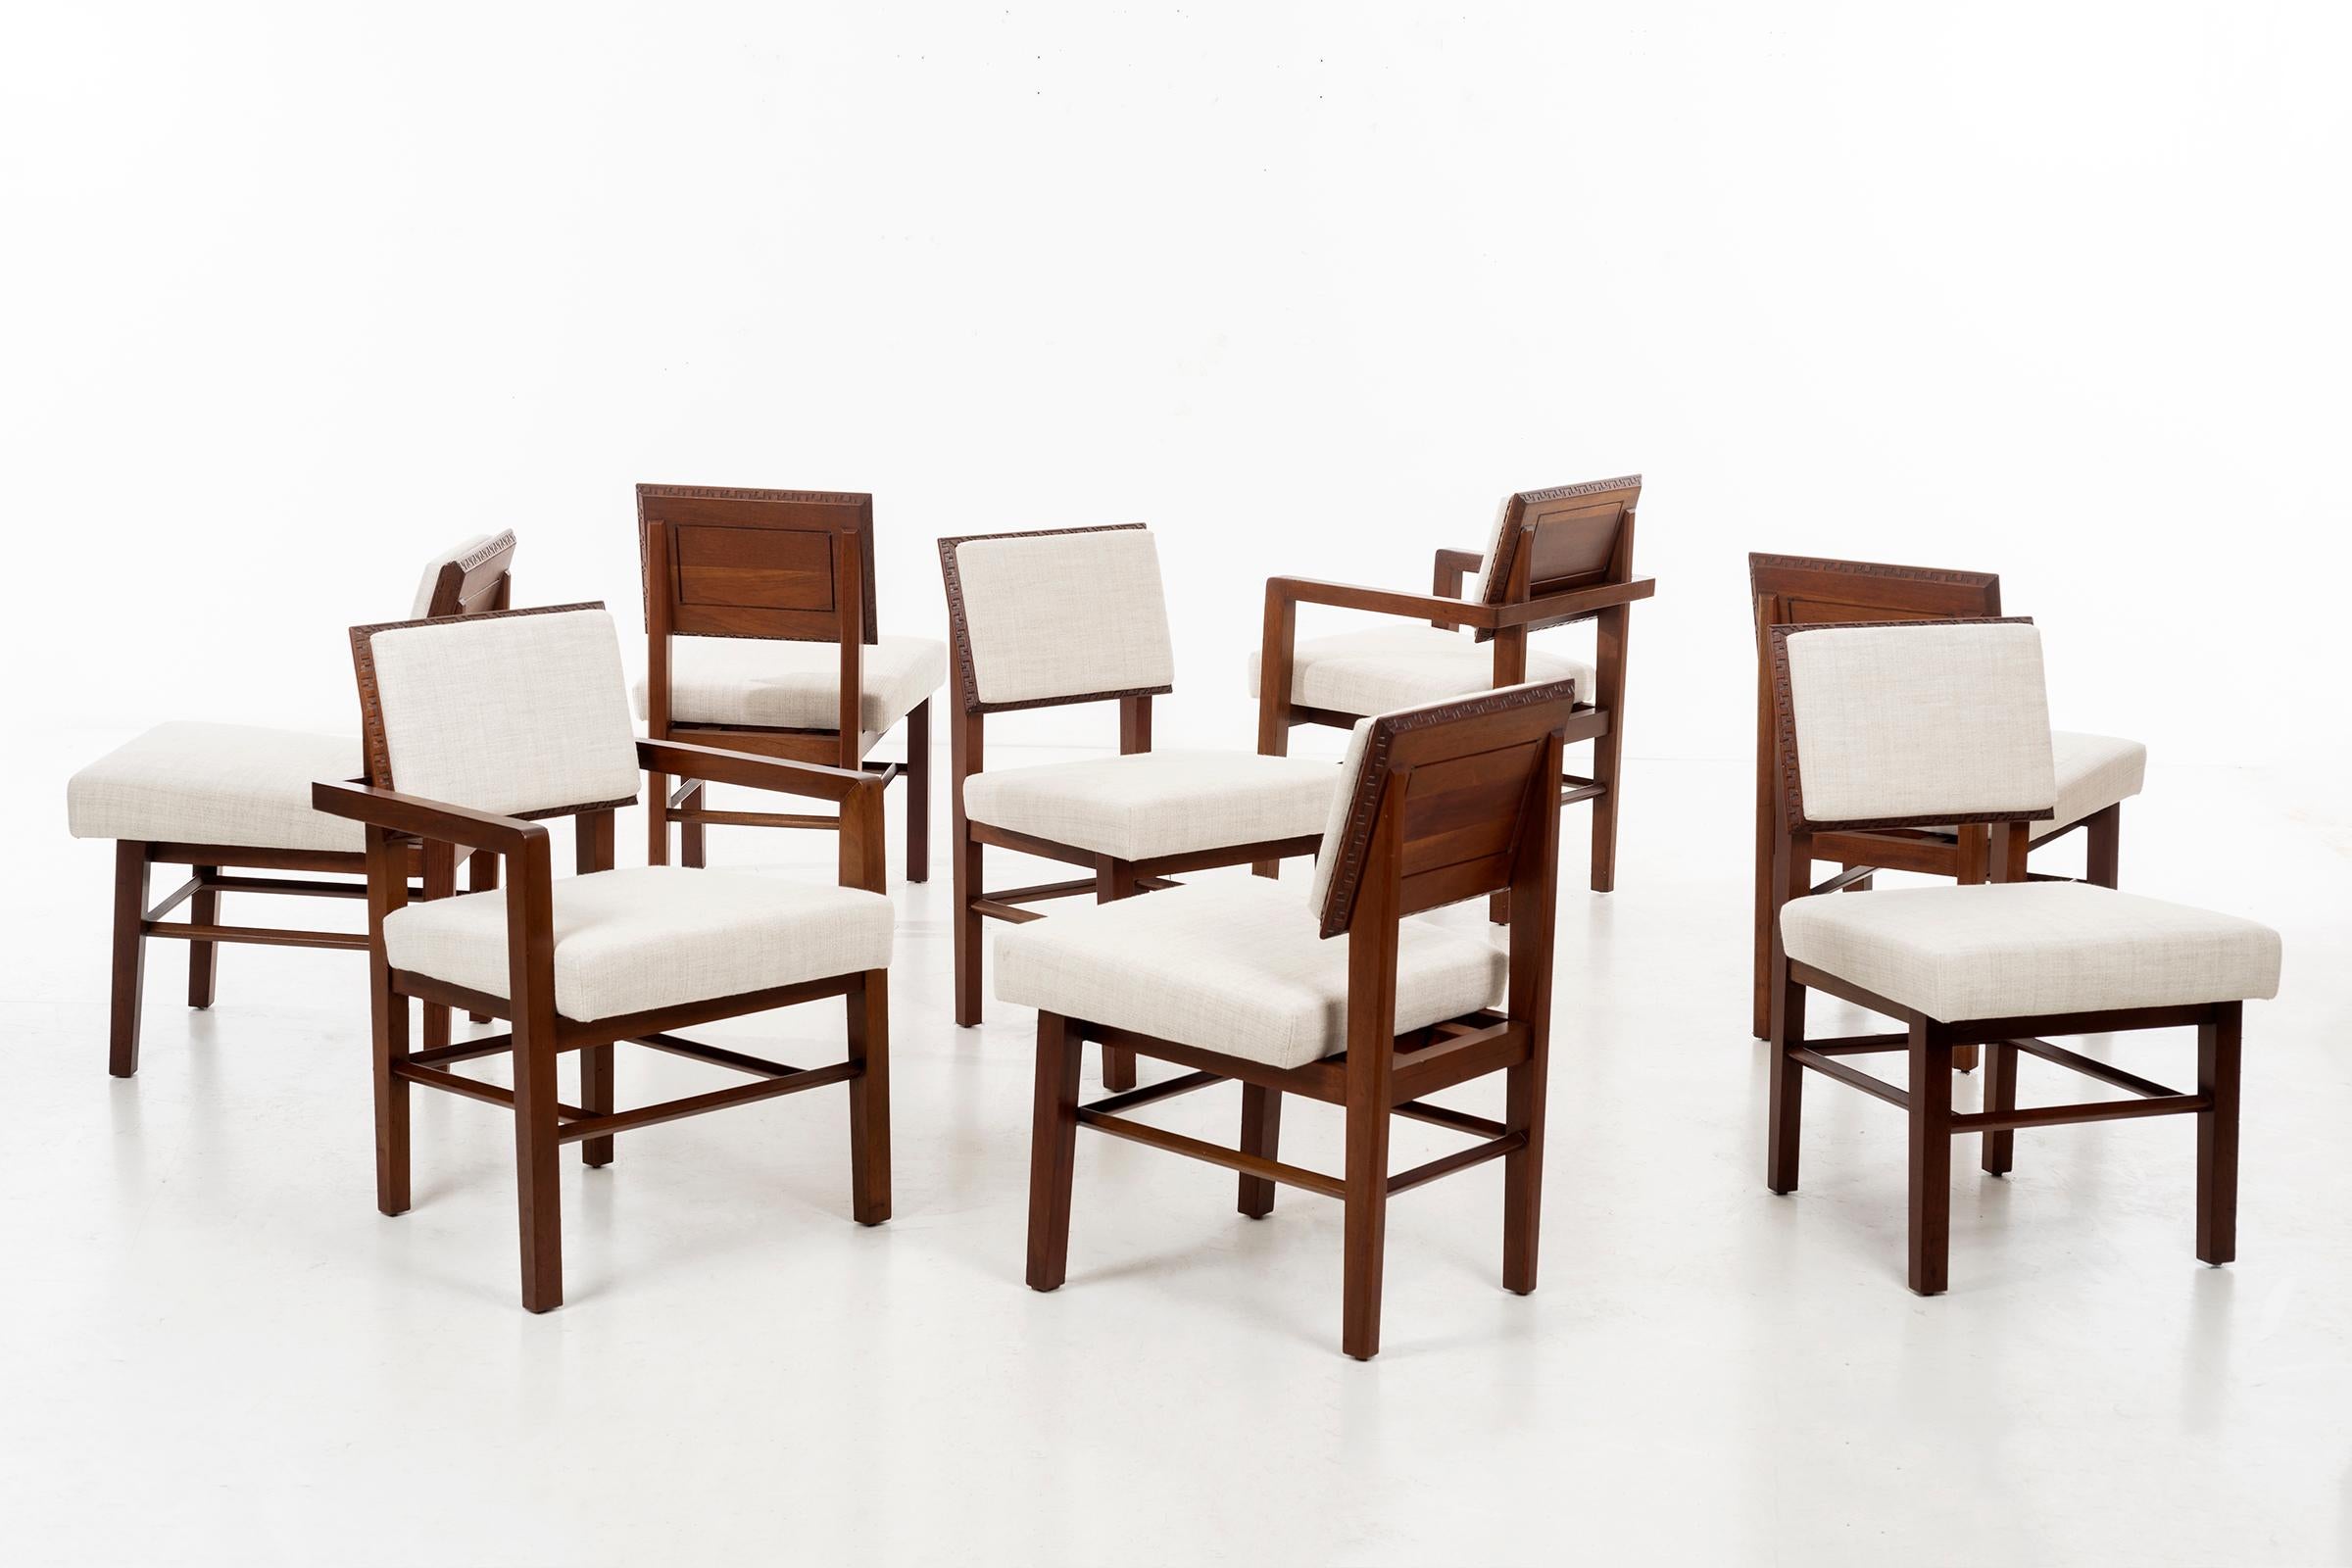 Eight Taliesin pattern dining chairs: 2 armchairs with 6 side chairs, solid mahogany wood with recent conservation restored oil finish.
Reupholstered with great plains cotton-poly fabric. 
  

   